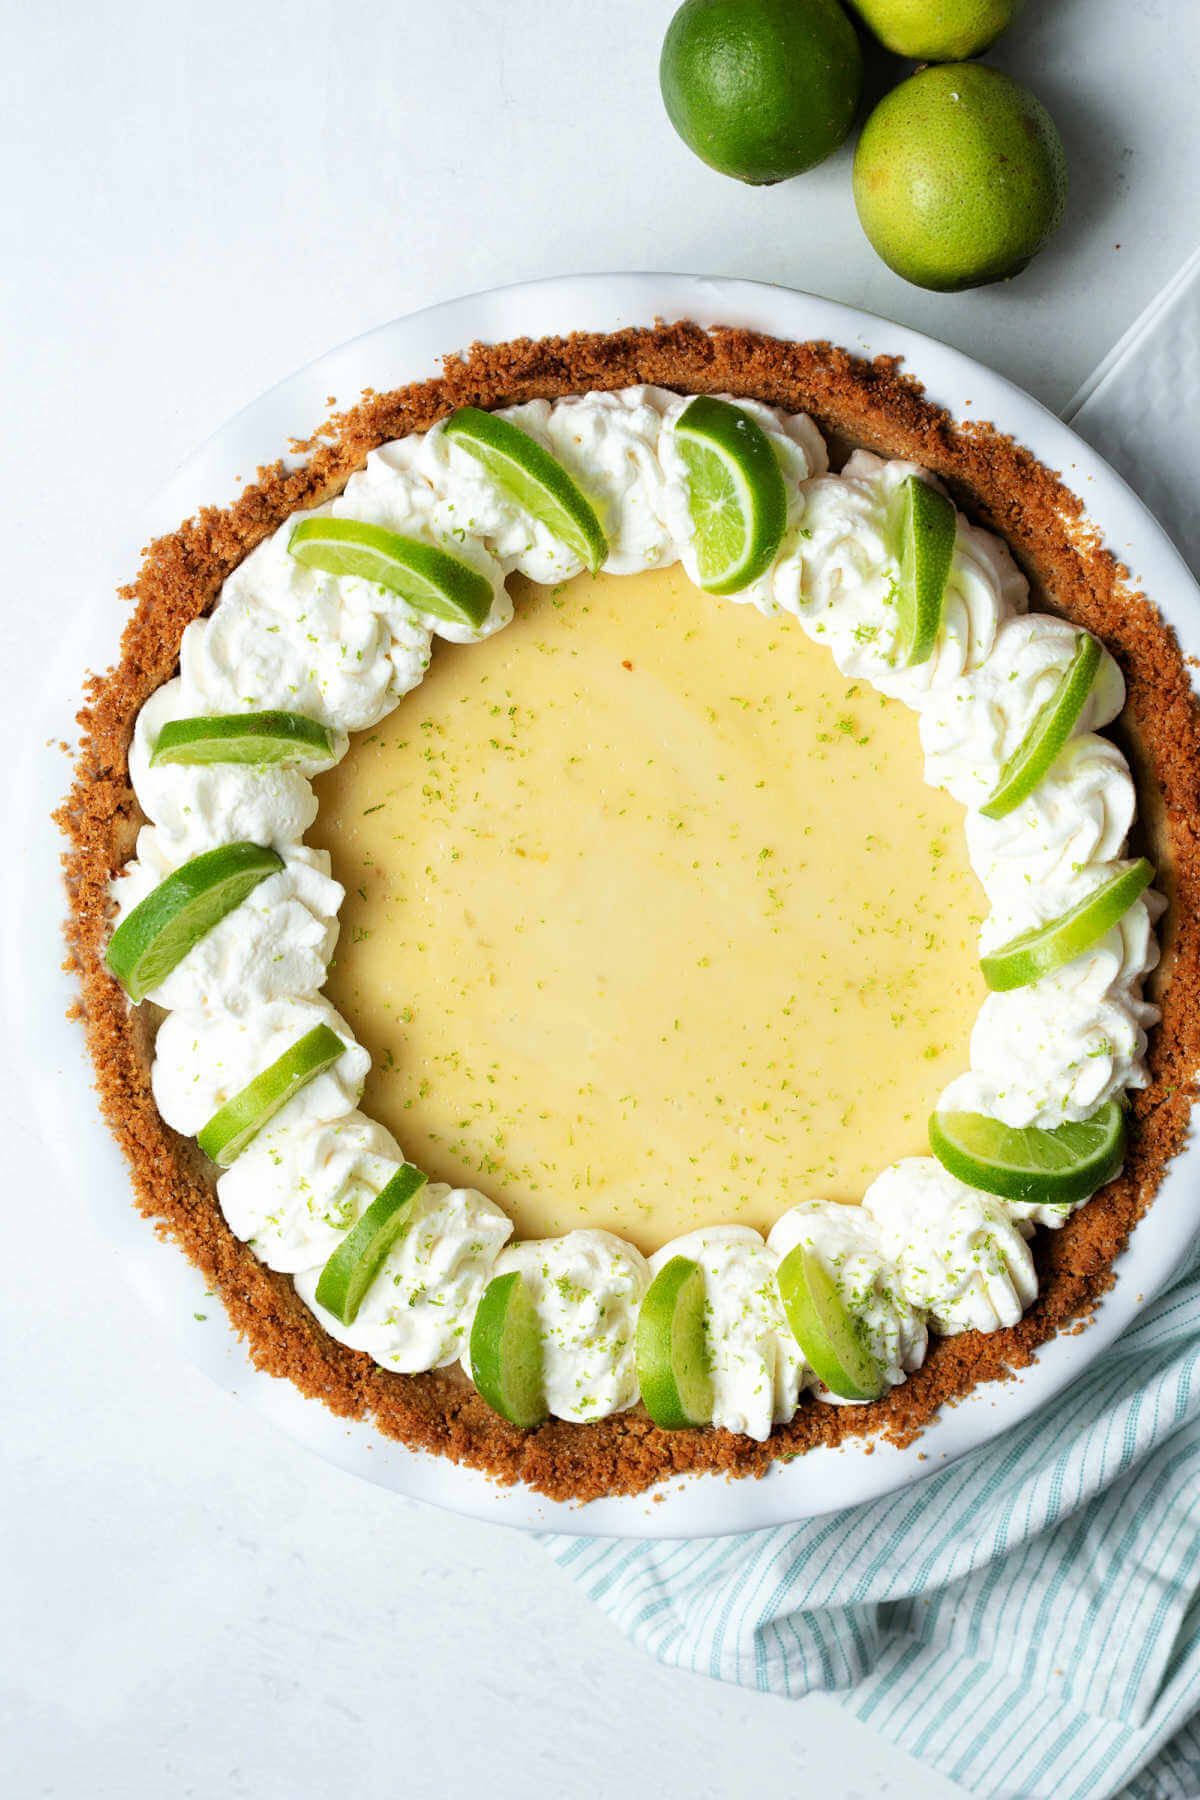 a whole key lime pie garnished with fresh whipped cream and lime slices on a table with limes.